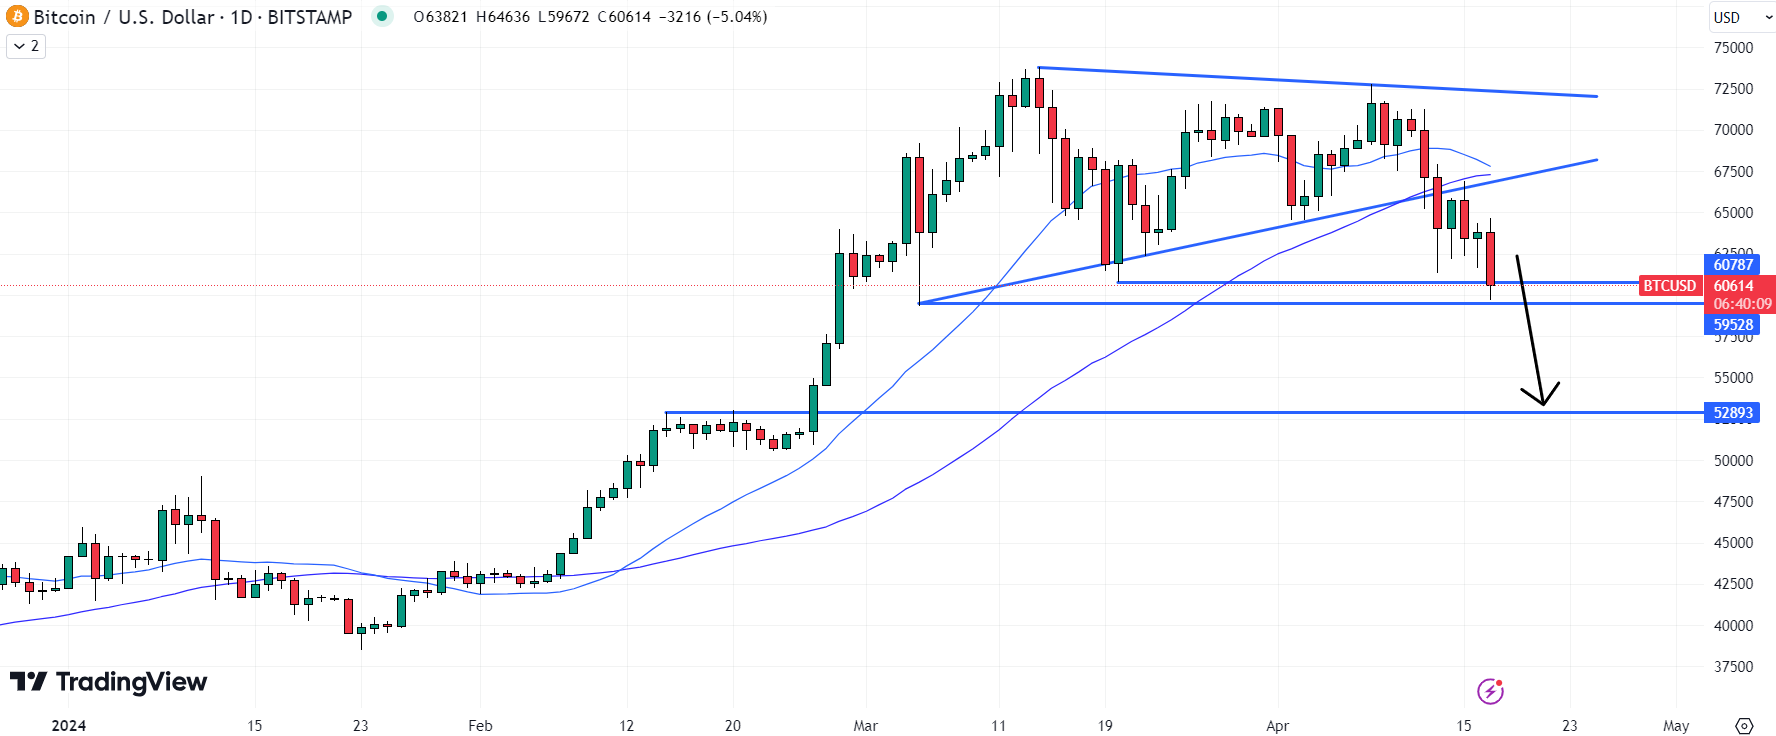 A break below $60,000 could see the Bitcoin price quickly dip to $53,000 support. Source: TradingView